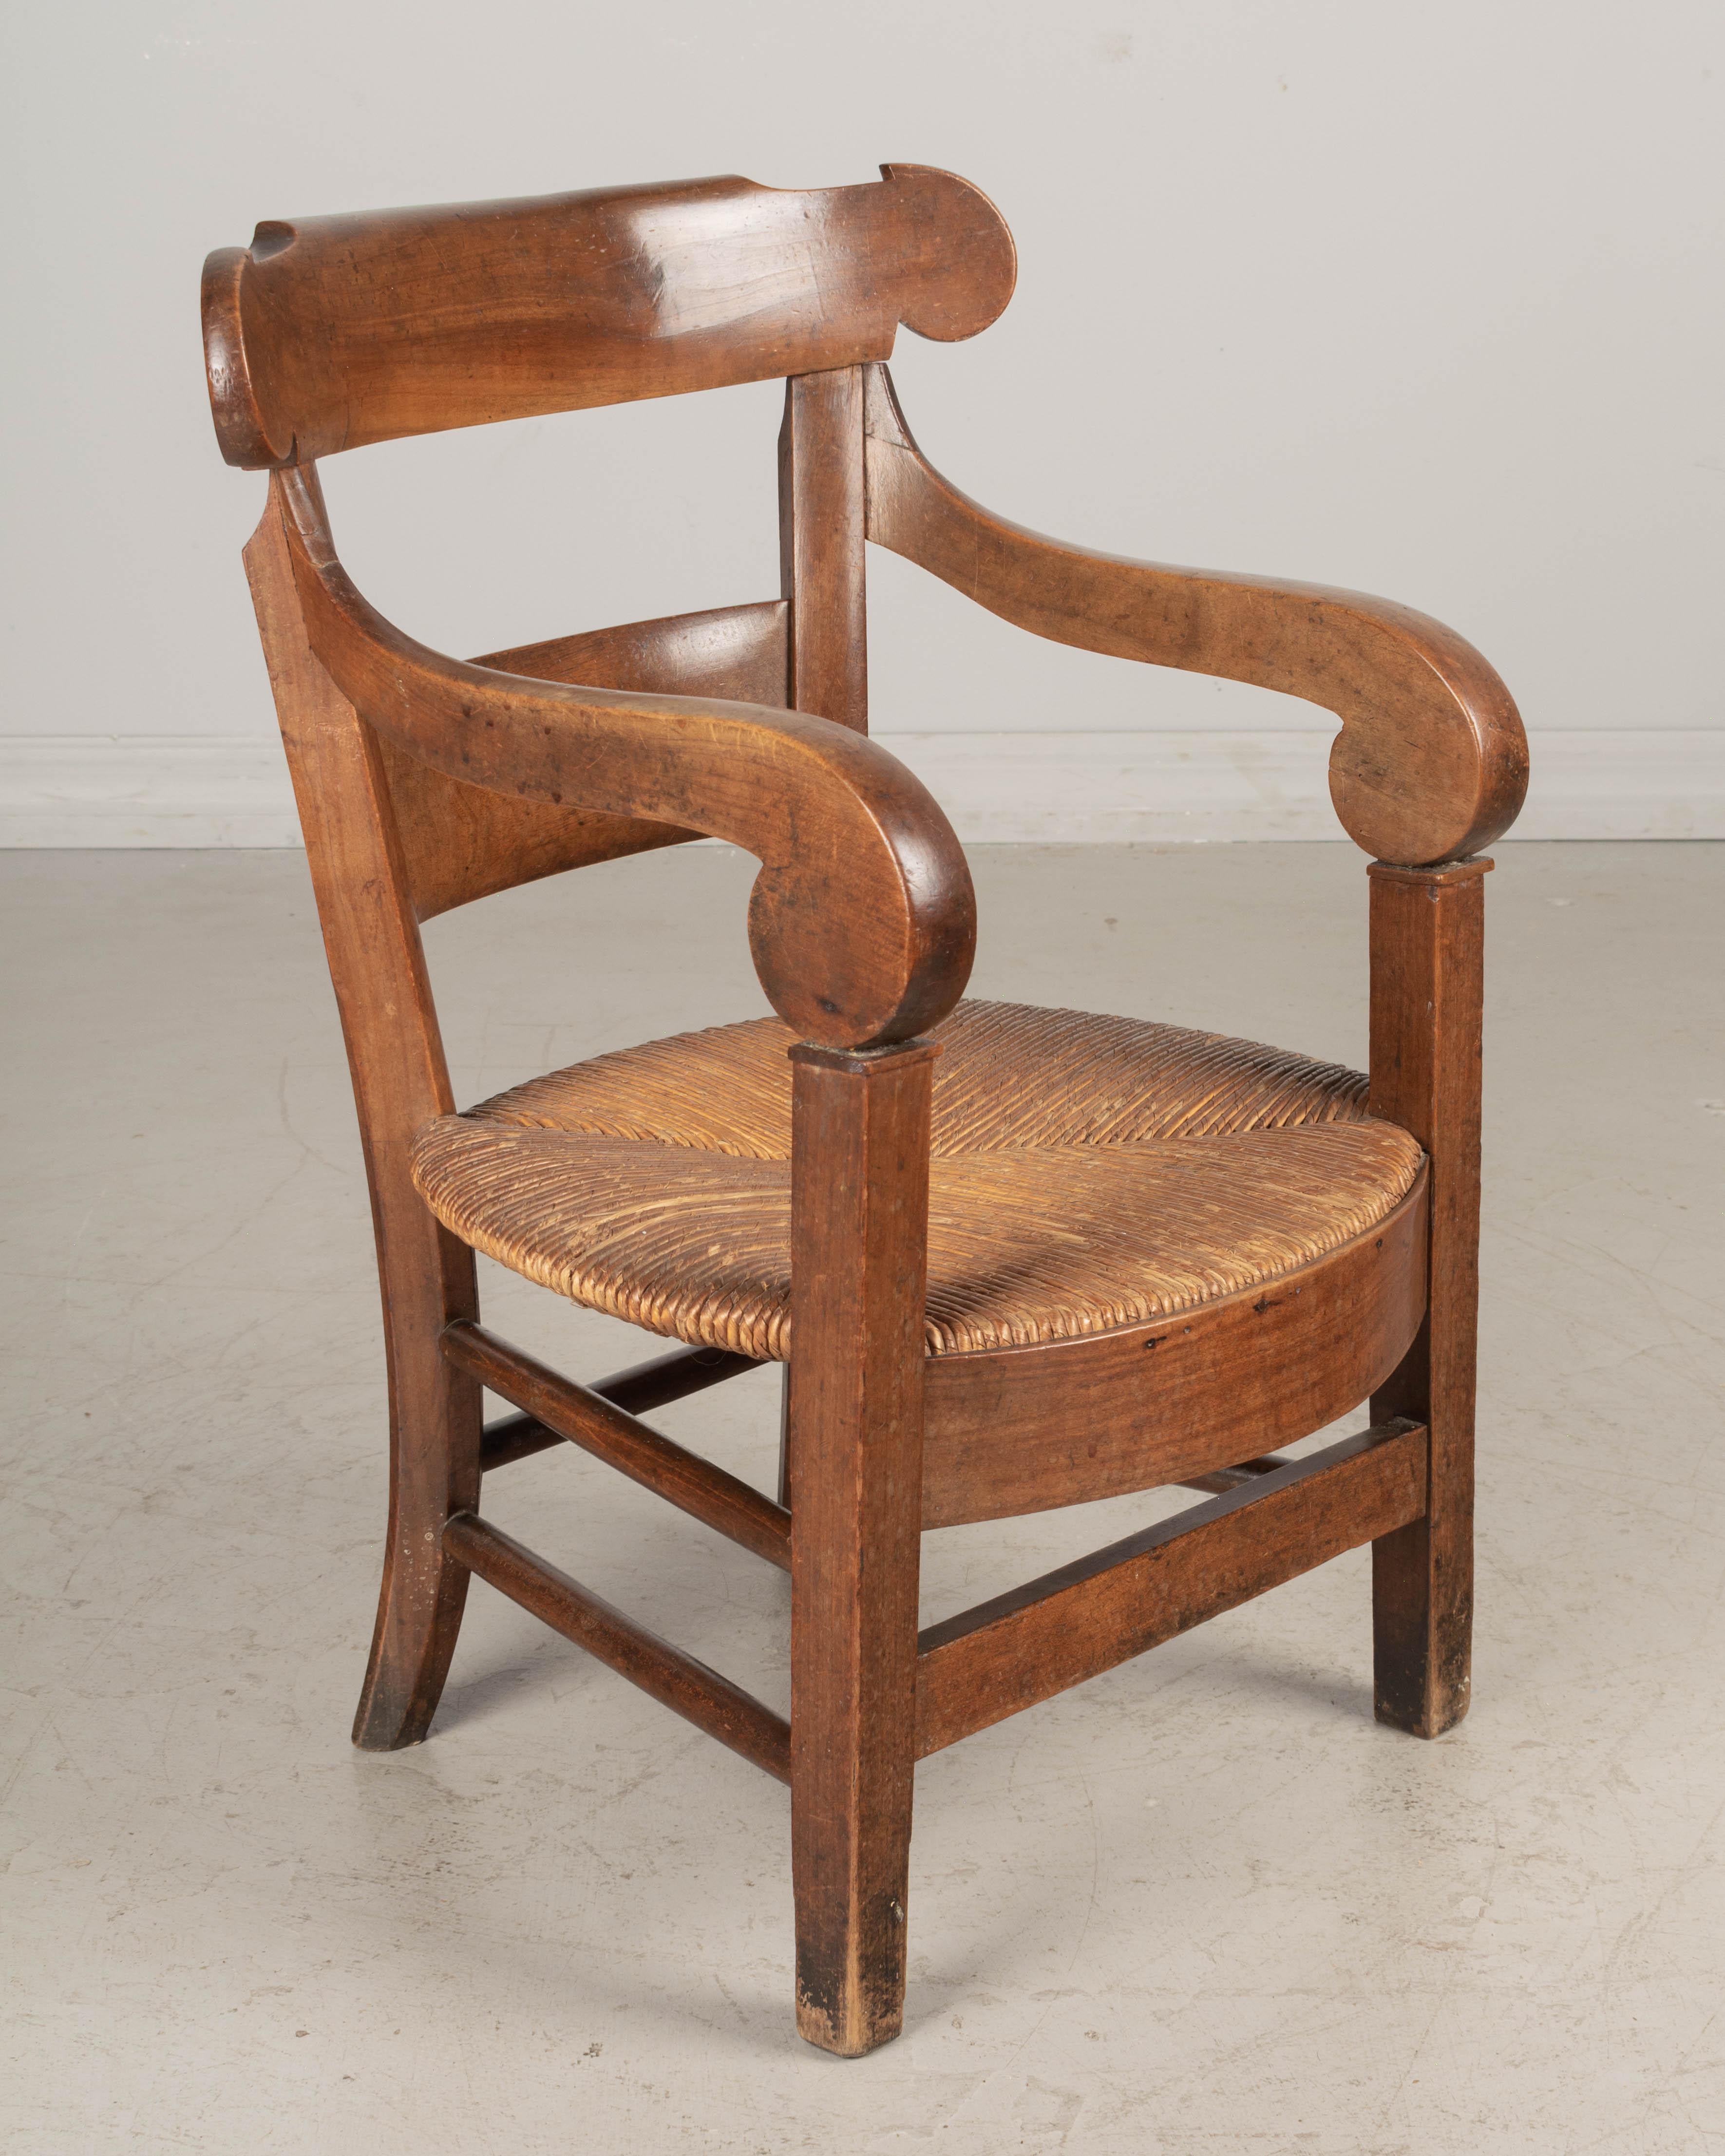 Hand-Crafted 19th Century Country French Child's Chair For Sale